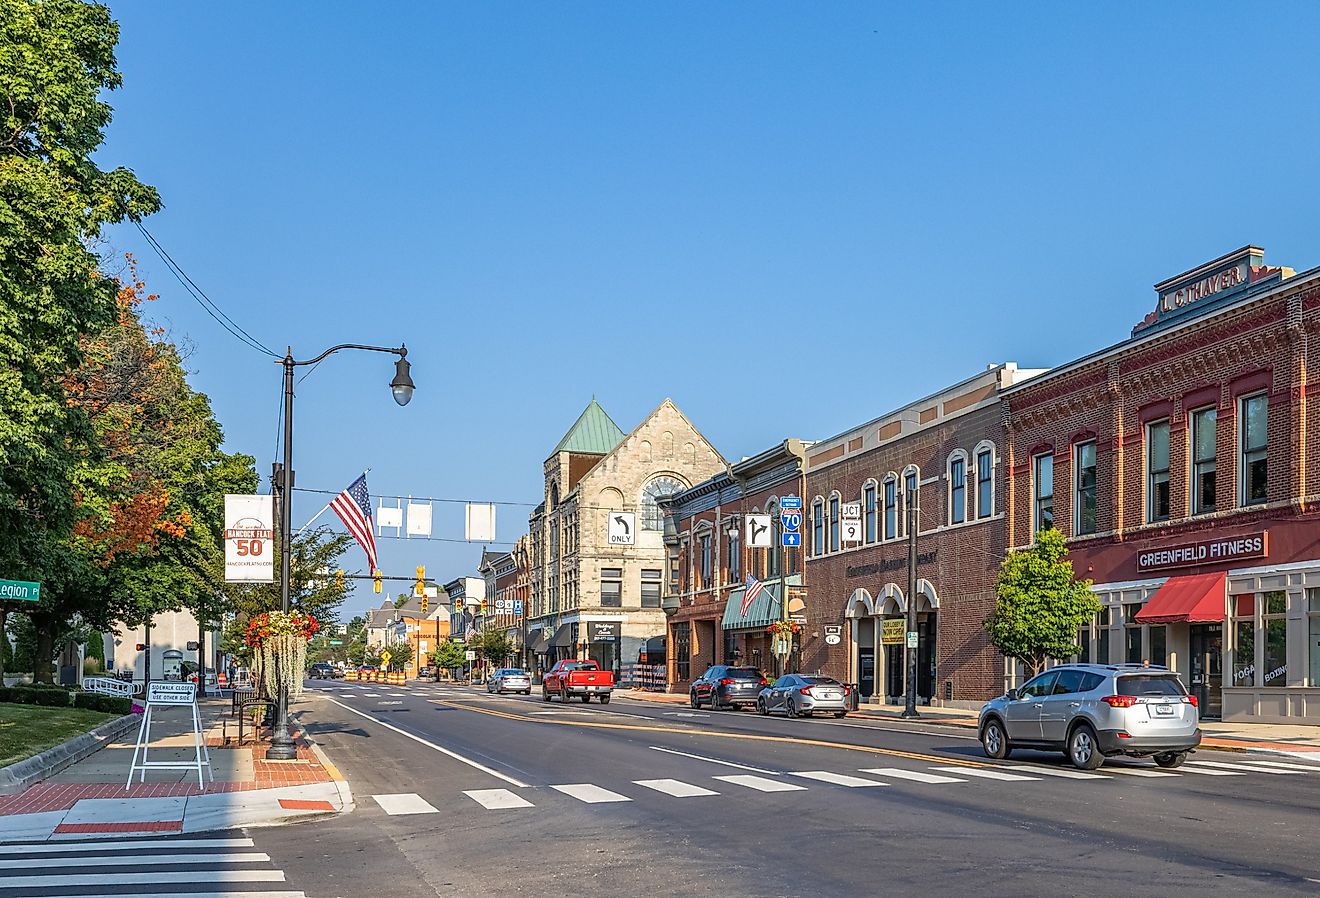 The business district on Main Street, Greenfield, Indiana. Image credit Roberto Galan via Shutterstock